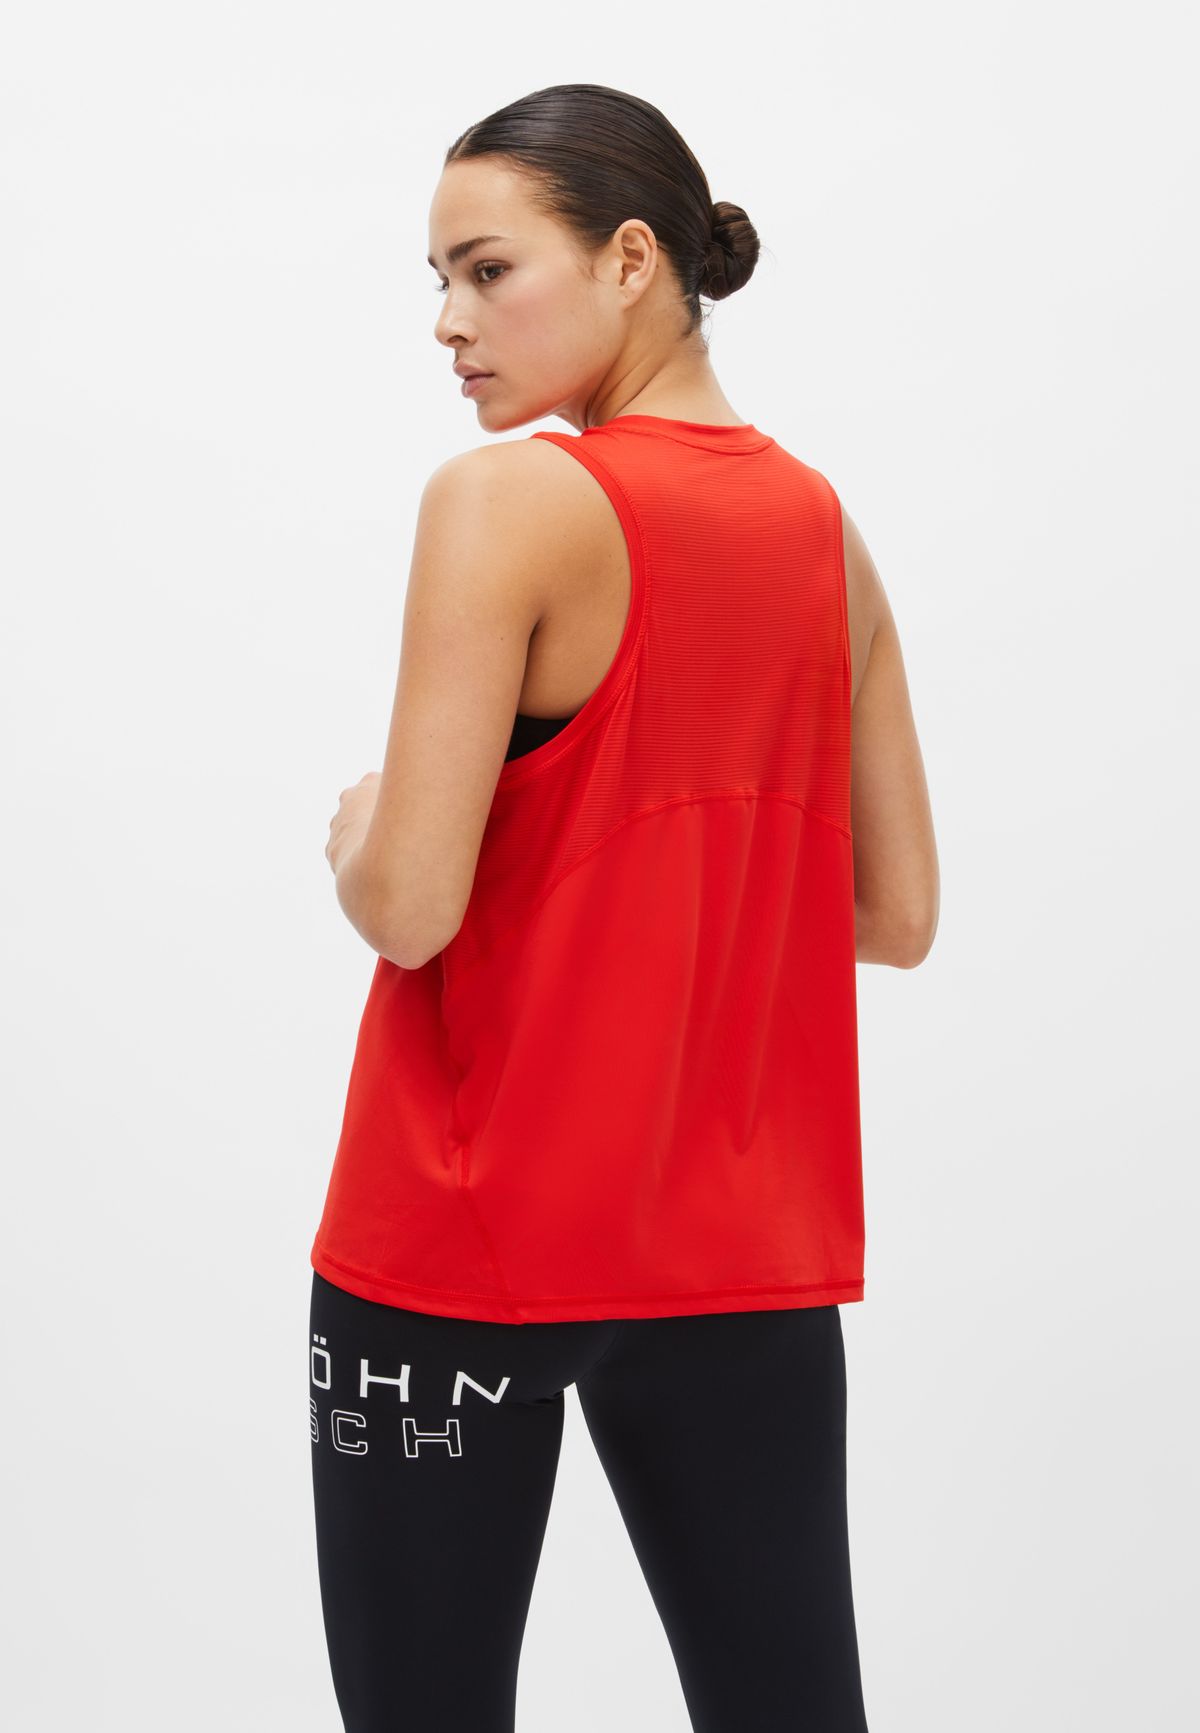 Workout Tank Top, Fiery Red